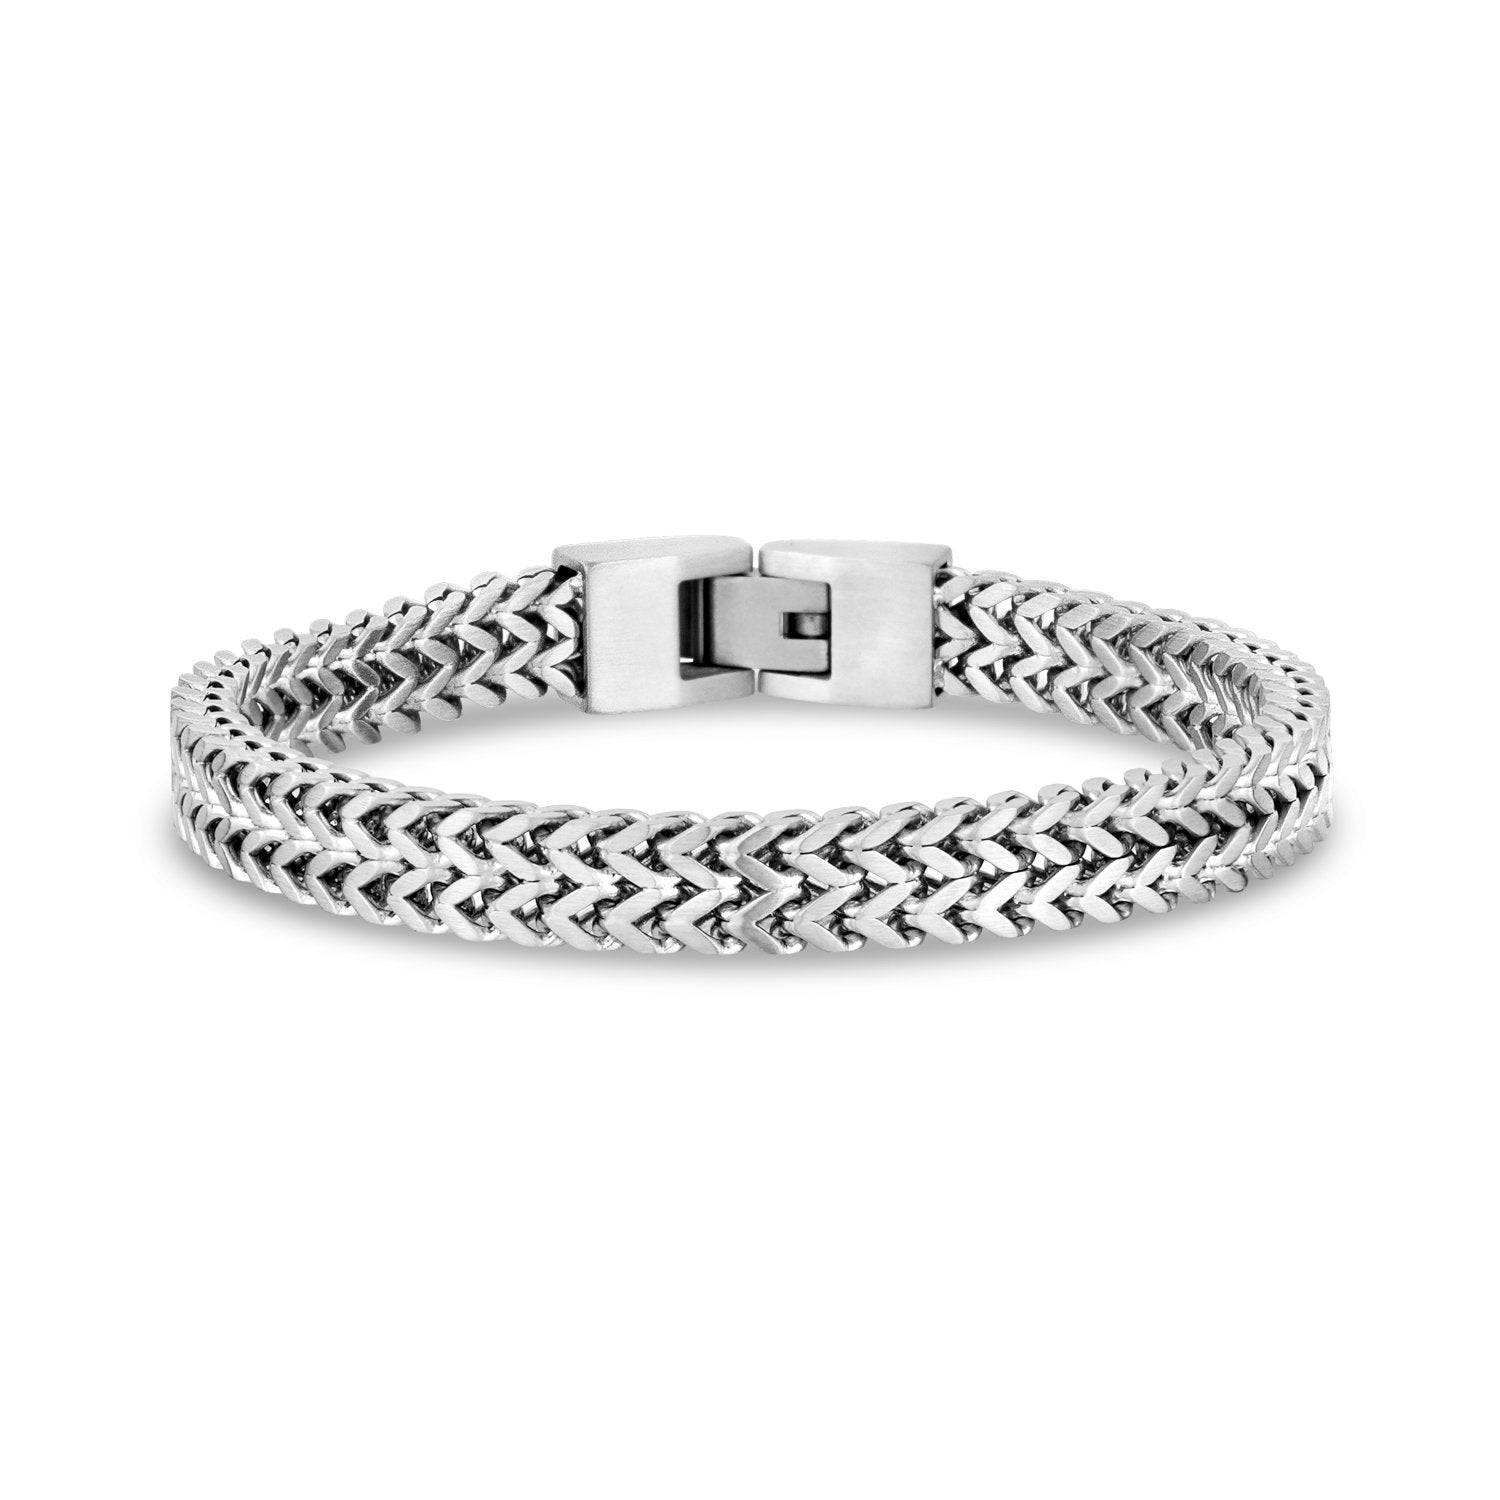 Buy Sullery Double Cuban 6 inch Stainless Steel Bracelet for Men Boys for  Men and Women at Amazon.in